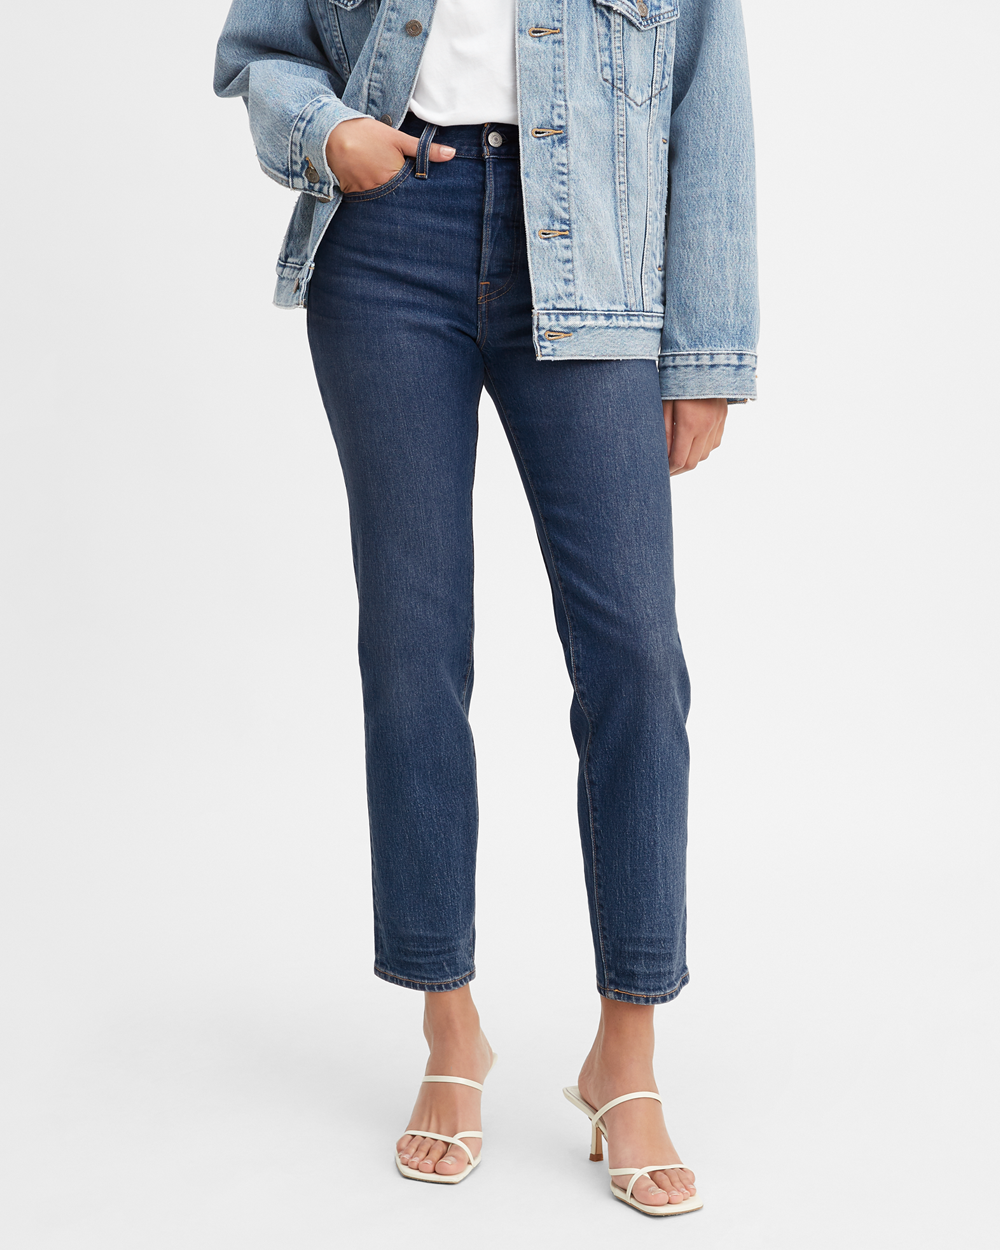 Levi's Women's Wedgie Fit Ankle Jean in Life's Work – zebraclubcanada